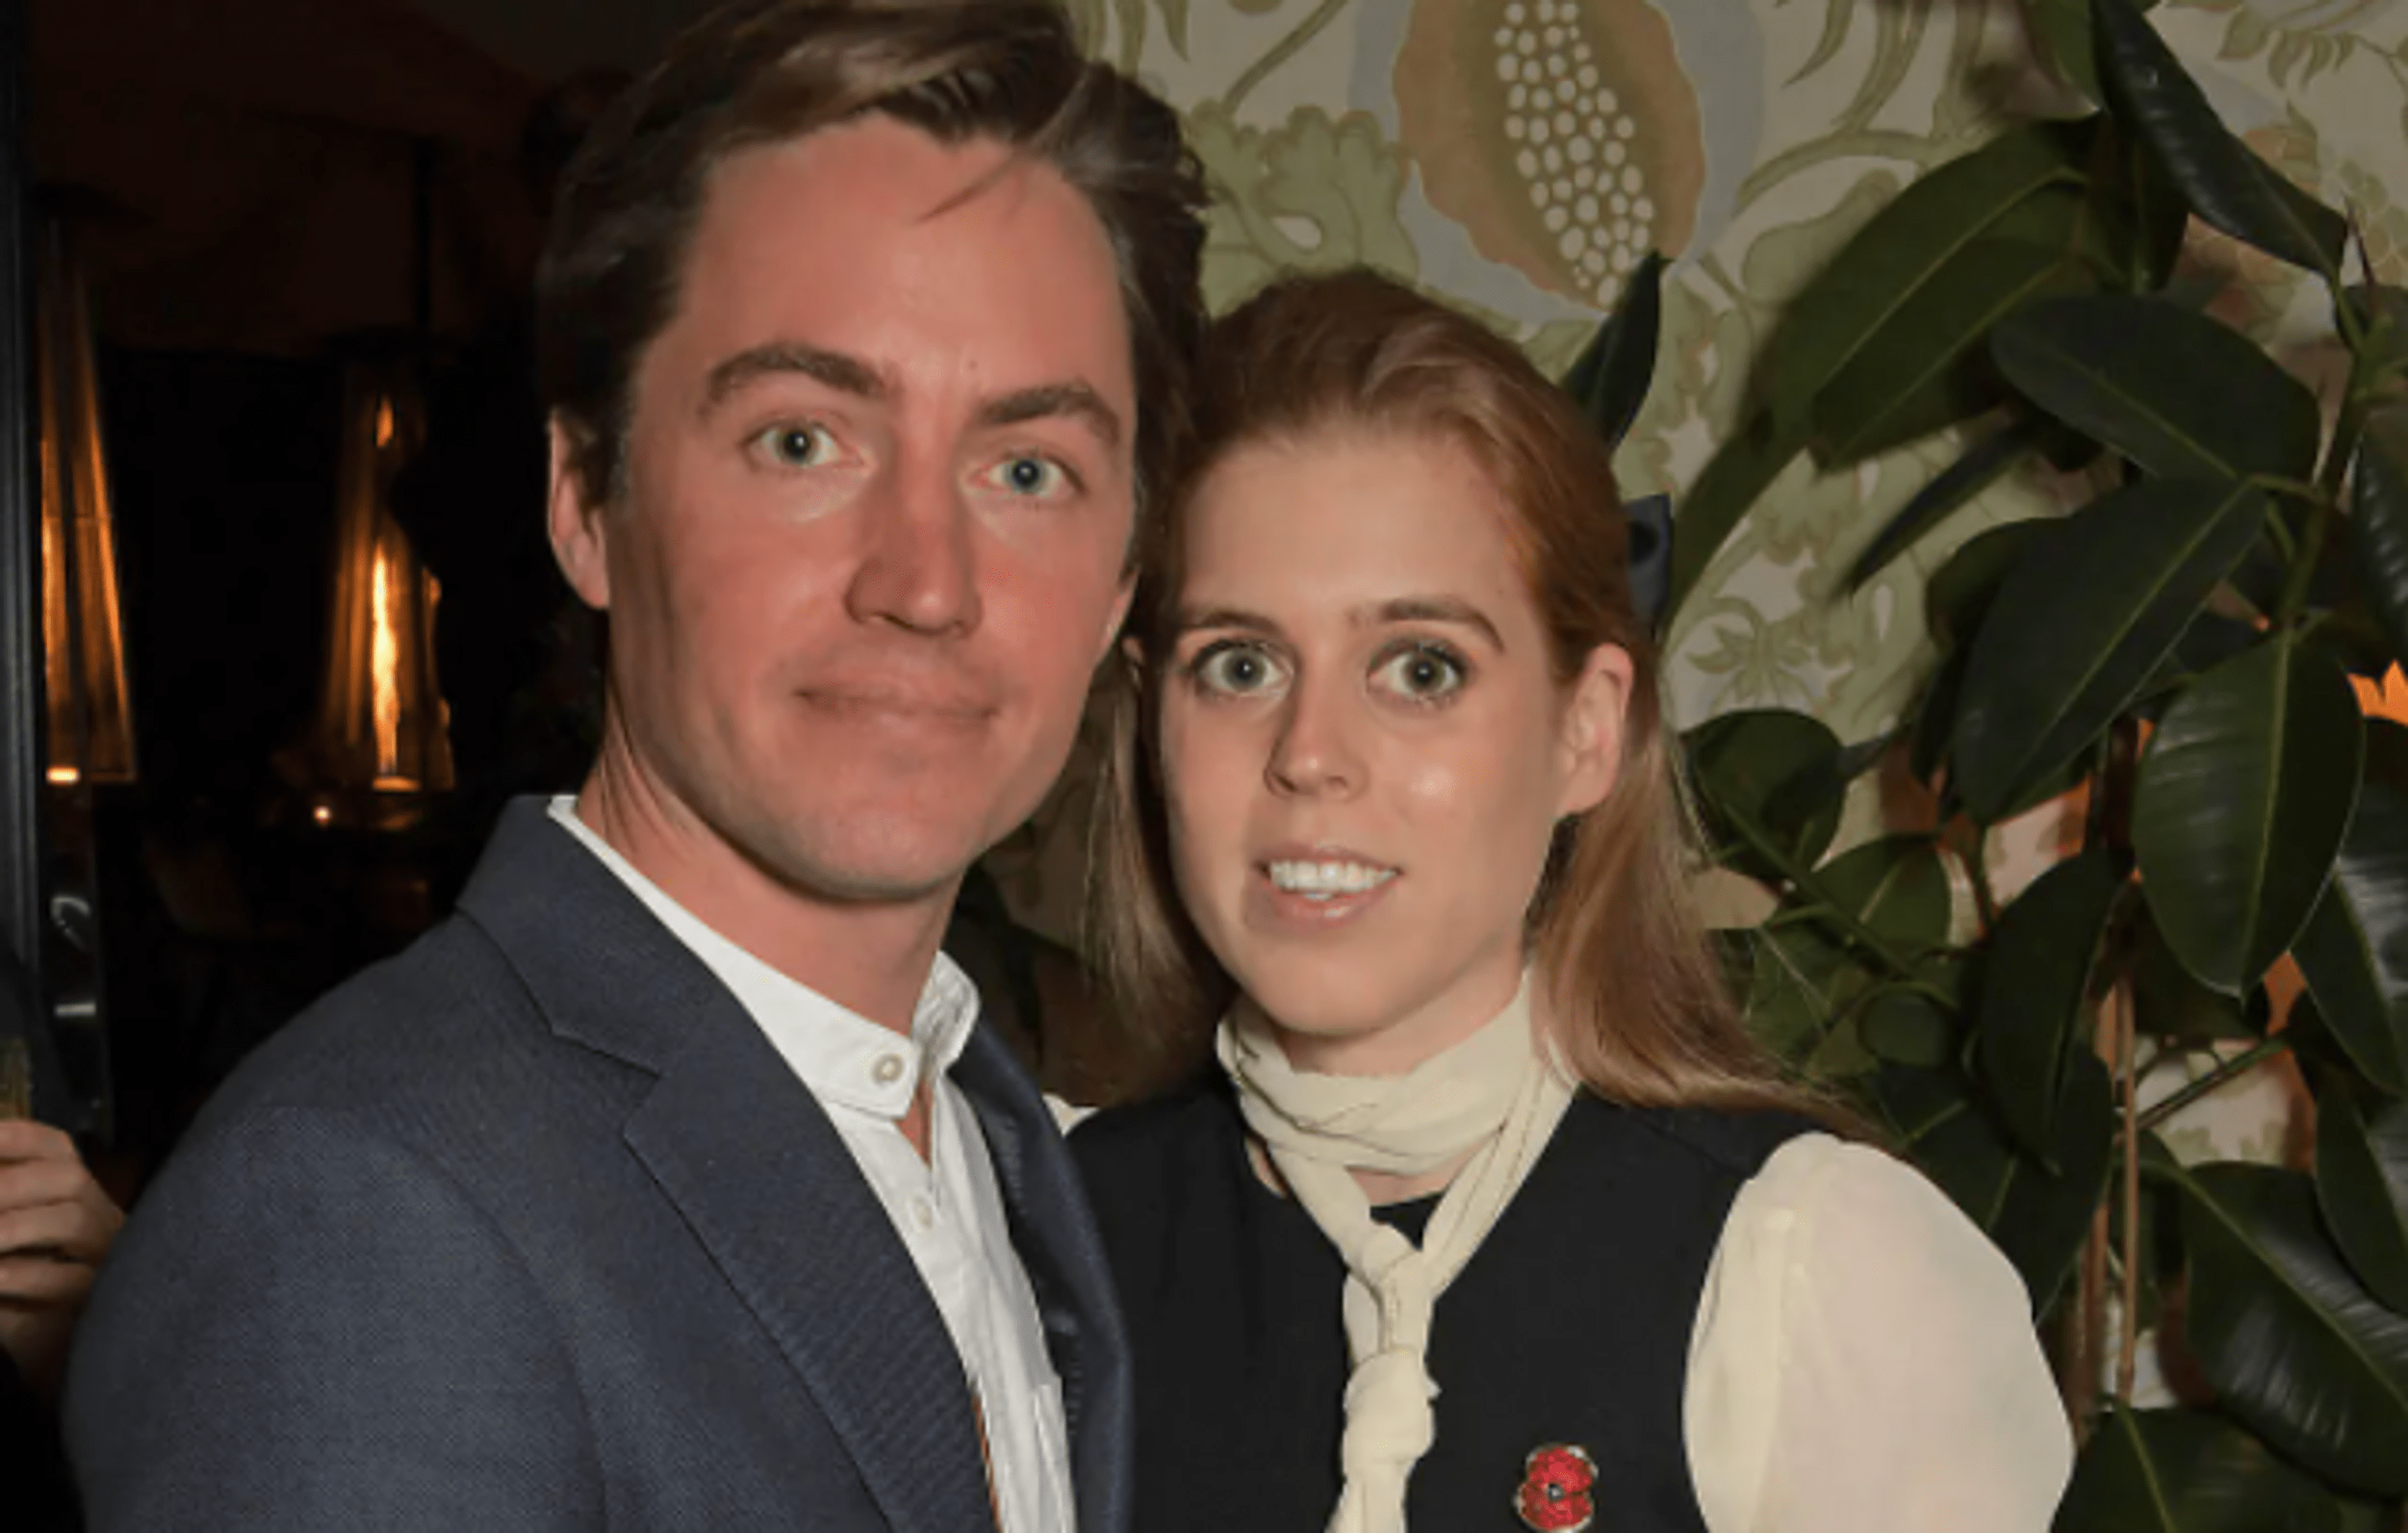 Why didn't Princess Beatrice and Edoardo Mapelli Mozzi display pictures of their daughter Sienna